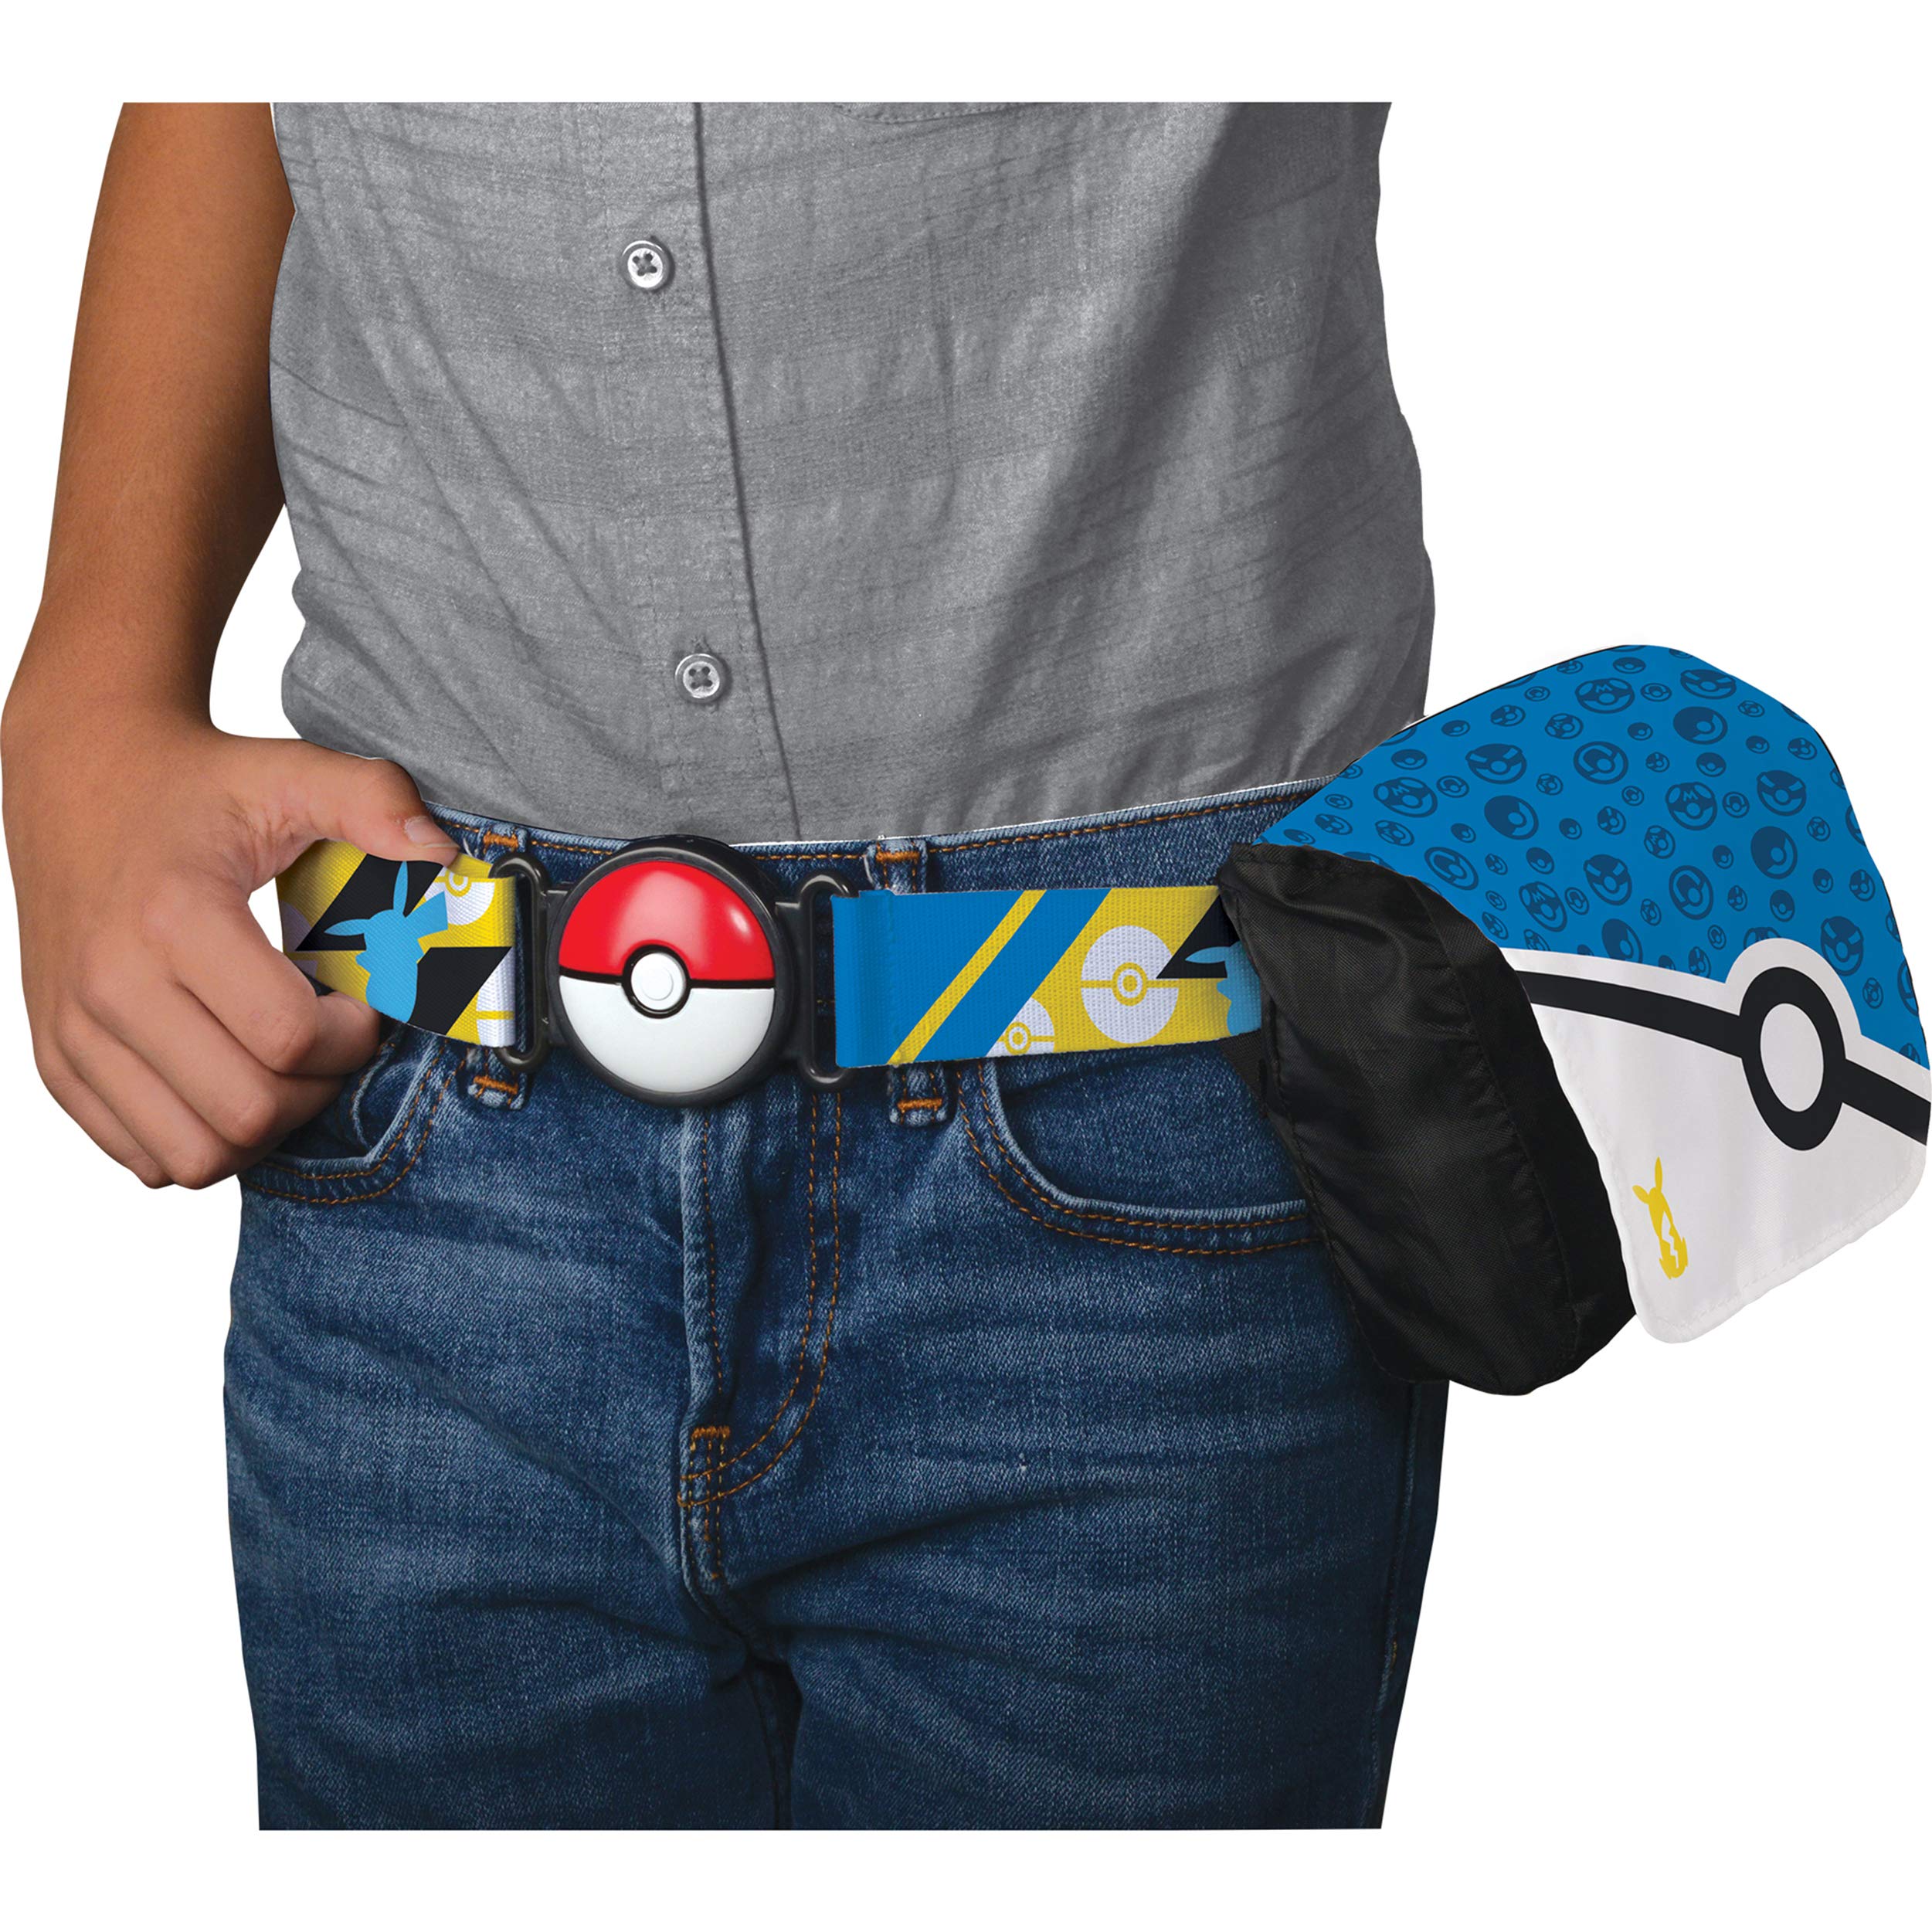 Pokemon Bandolier Set - Features a 2-Inch Pikachu Figure, 2 Clip ‘N’ Go Poke Balls/ Belt, and a Carrying Bag - Folds Out Into Battle Mat for 2 Figures